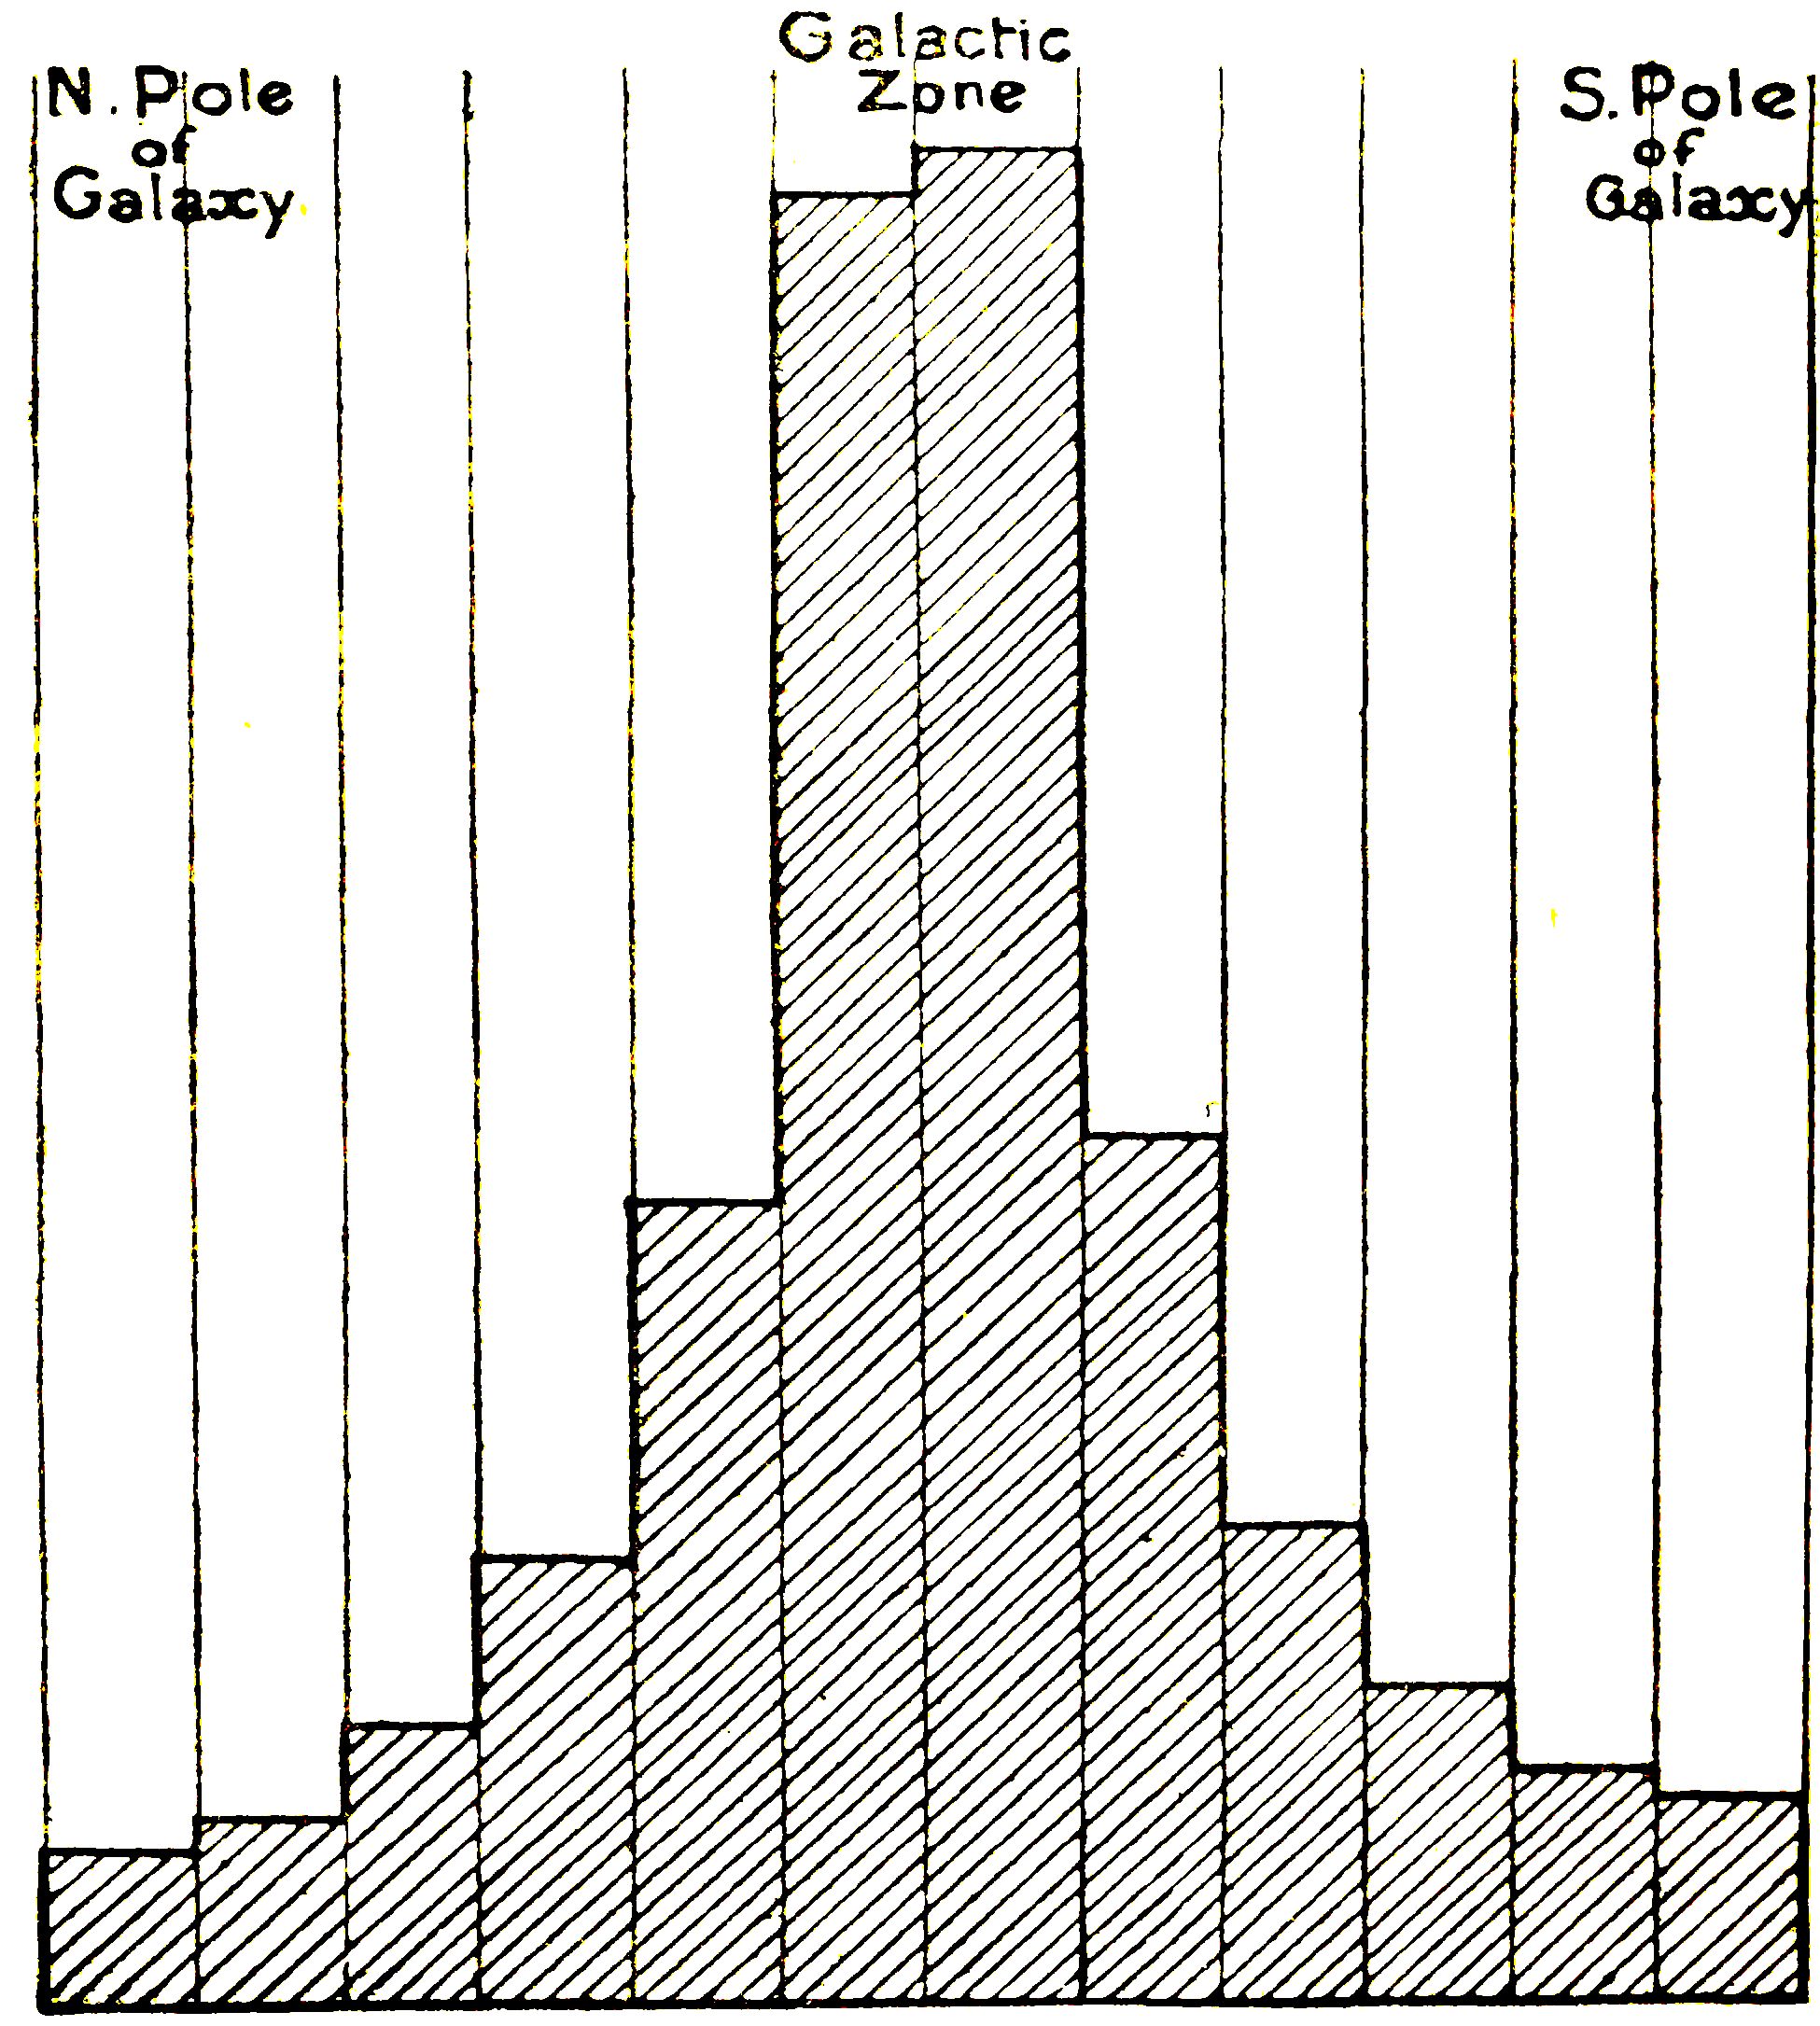 DIAGRAM OF STAR-DENSITY.
From Table in Sir J. Herschel's Outlines of Astronomy
(10th ed., pp. 577-578).